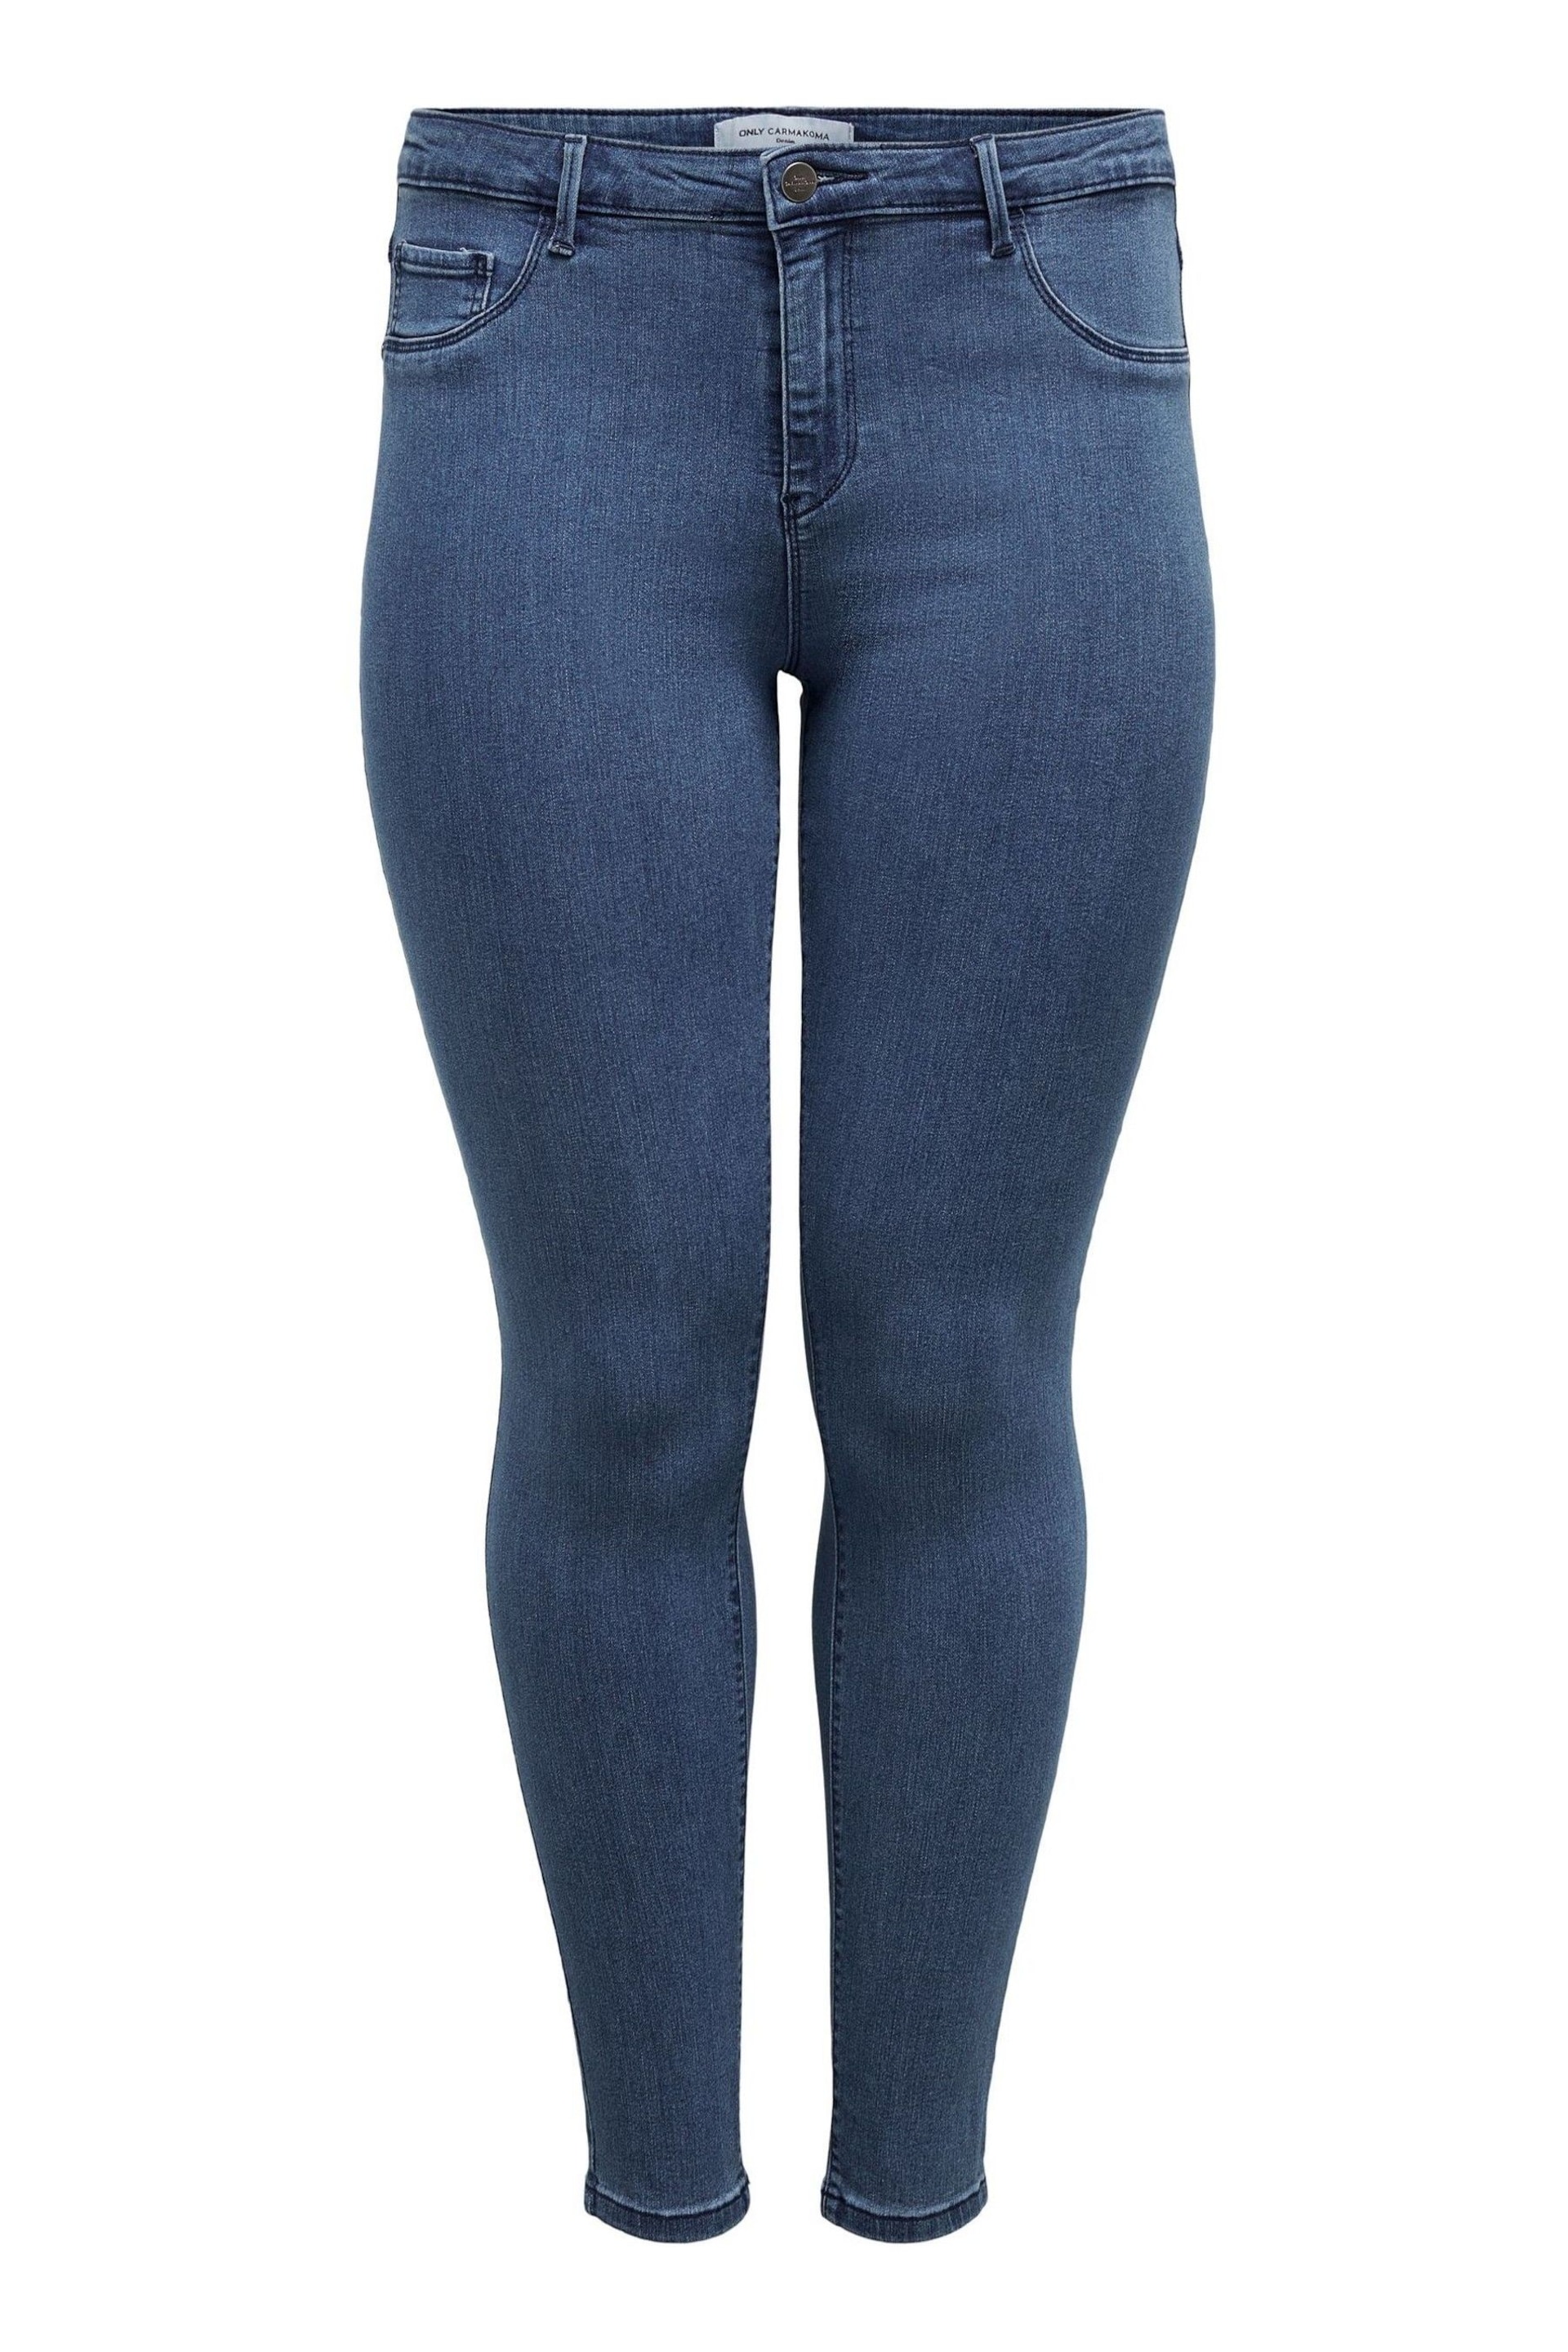 ONLY Curve Light Blue Push Up Sculpting Skinny Jeans - Image 7 of 8